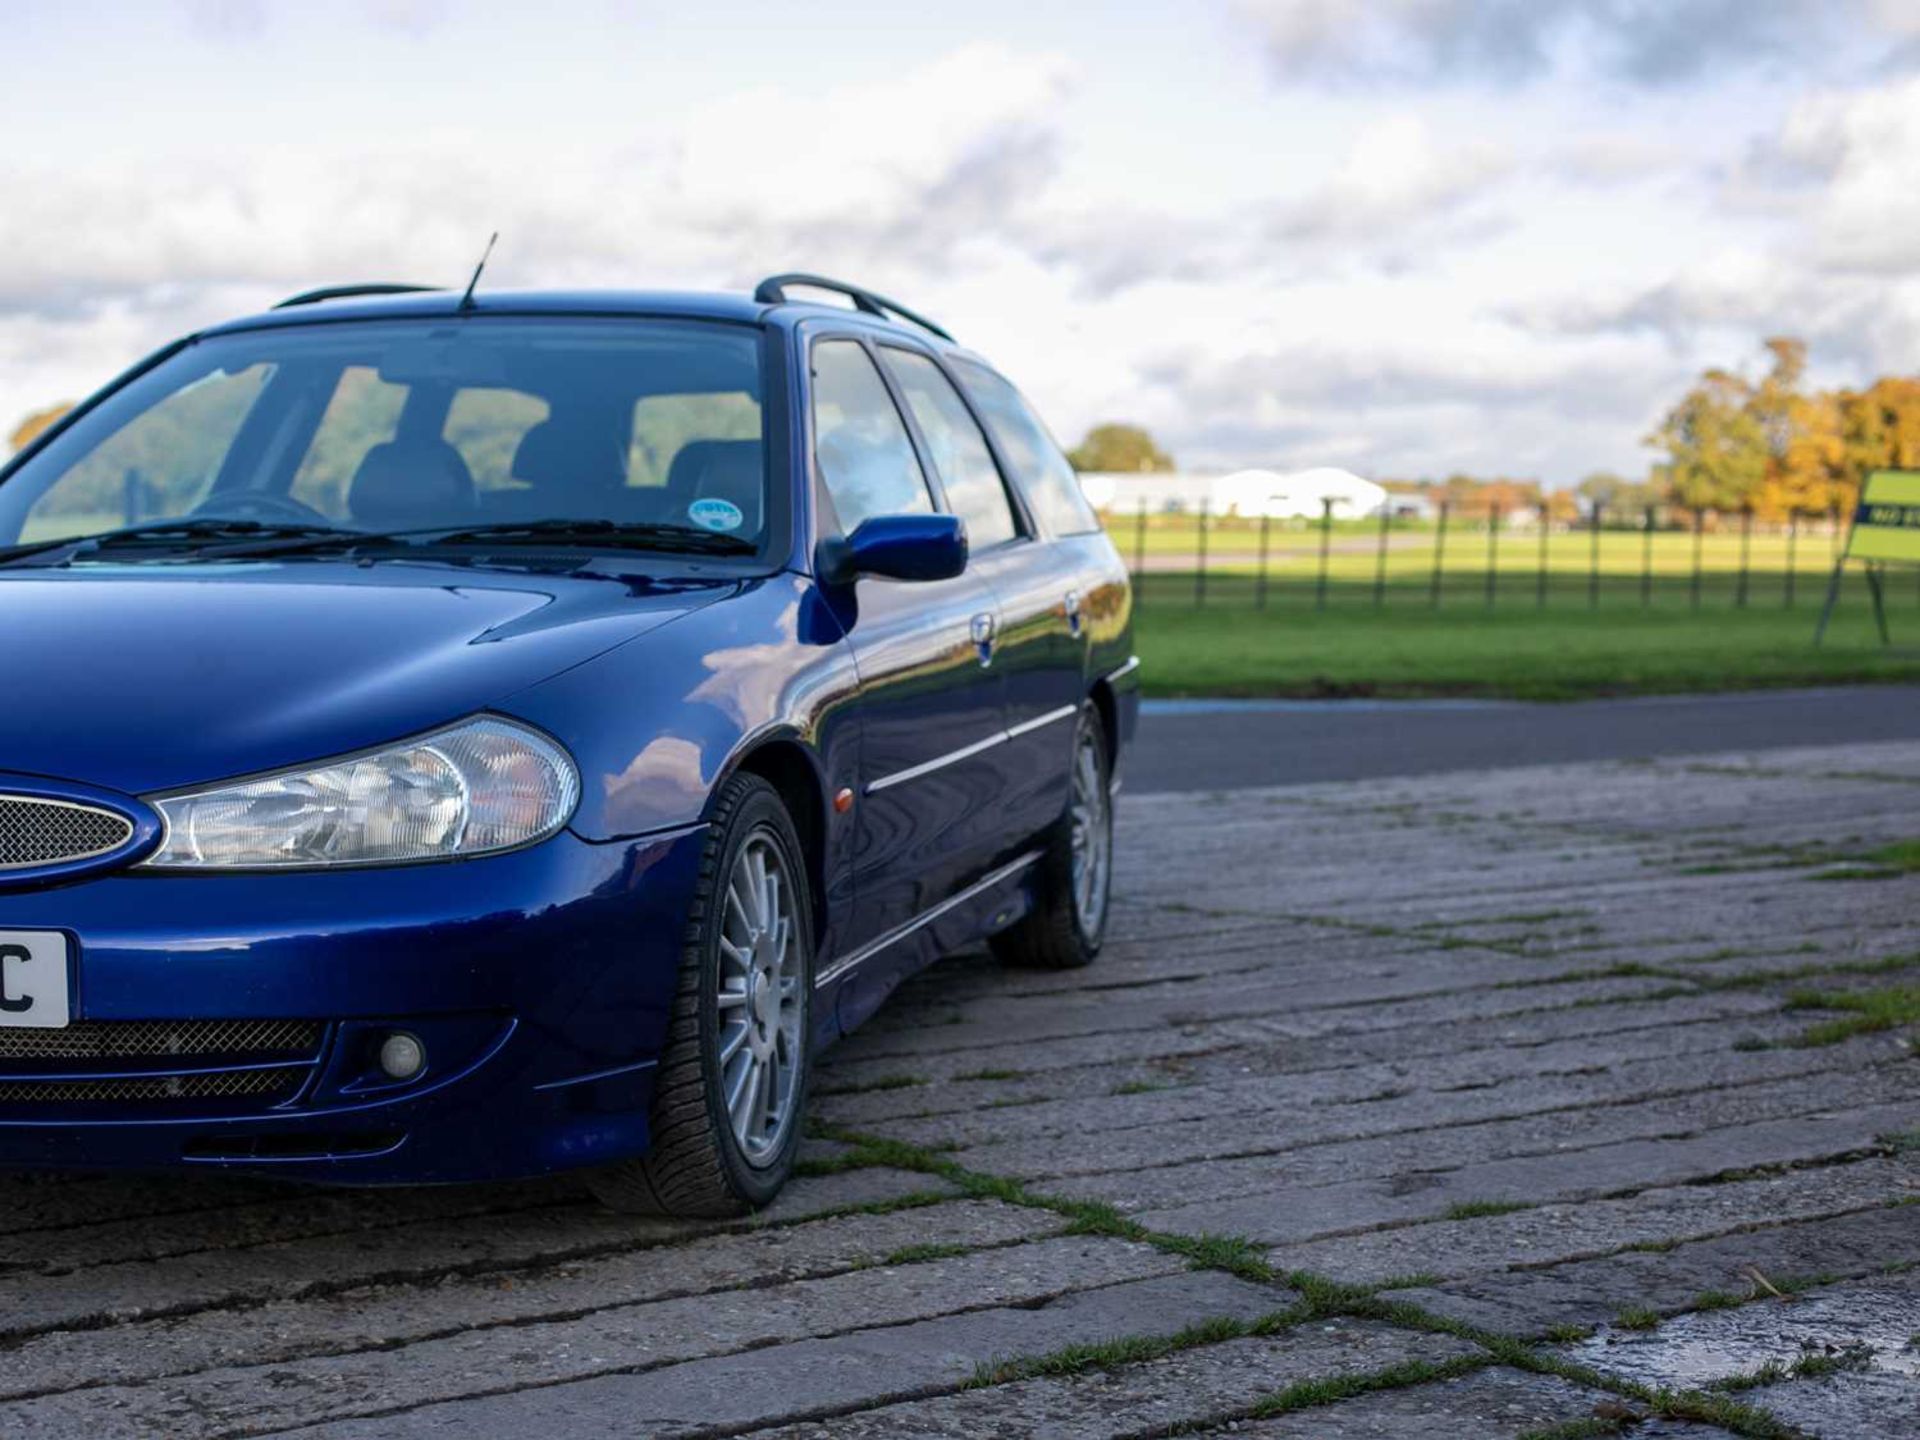 1999 Ford Mondeo ST200 Estate ***NO RESERVE*** Thought to be one of just 15 ST200 load-luggers, stil - Image 20 of 75